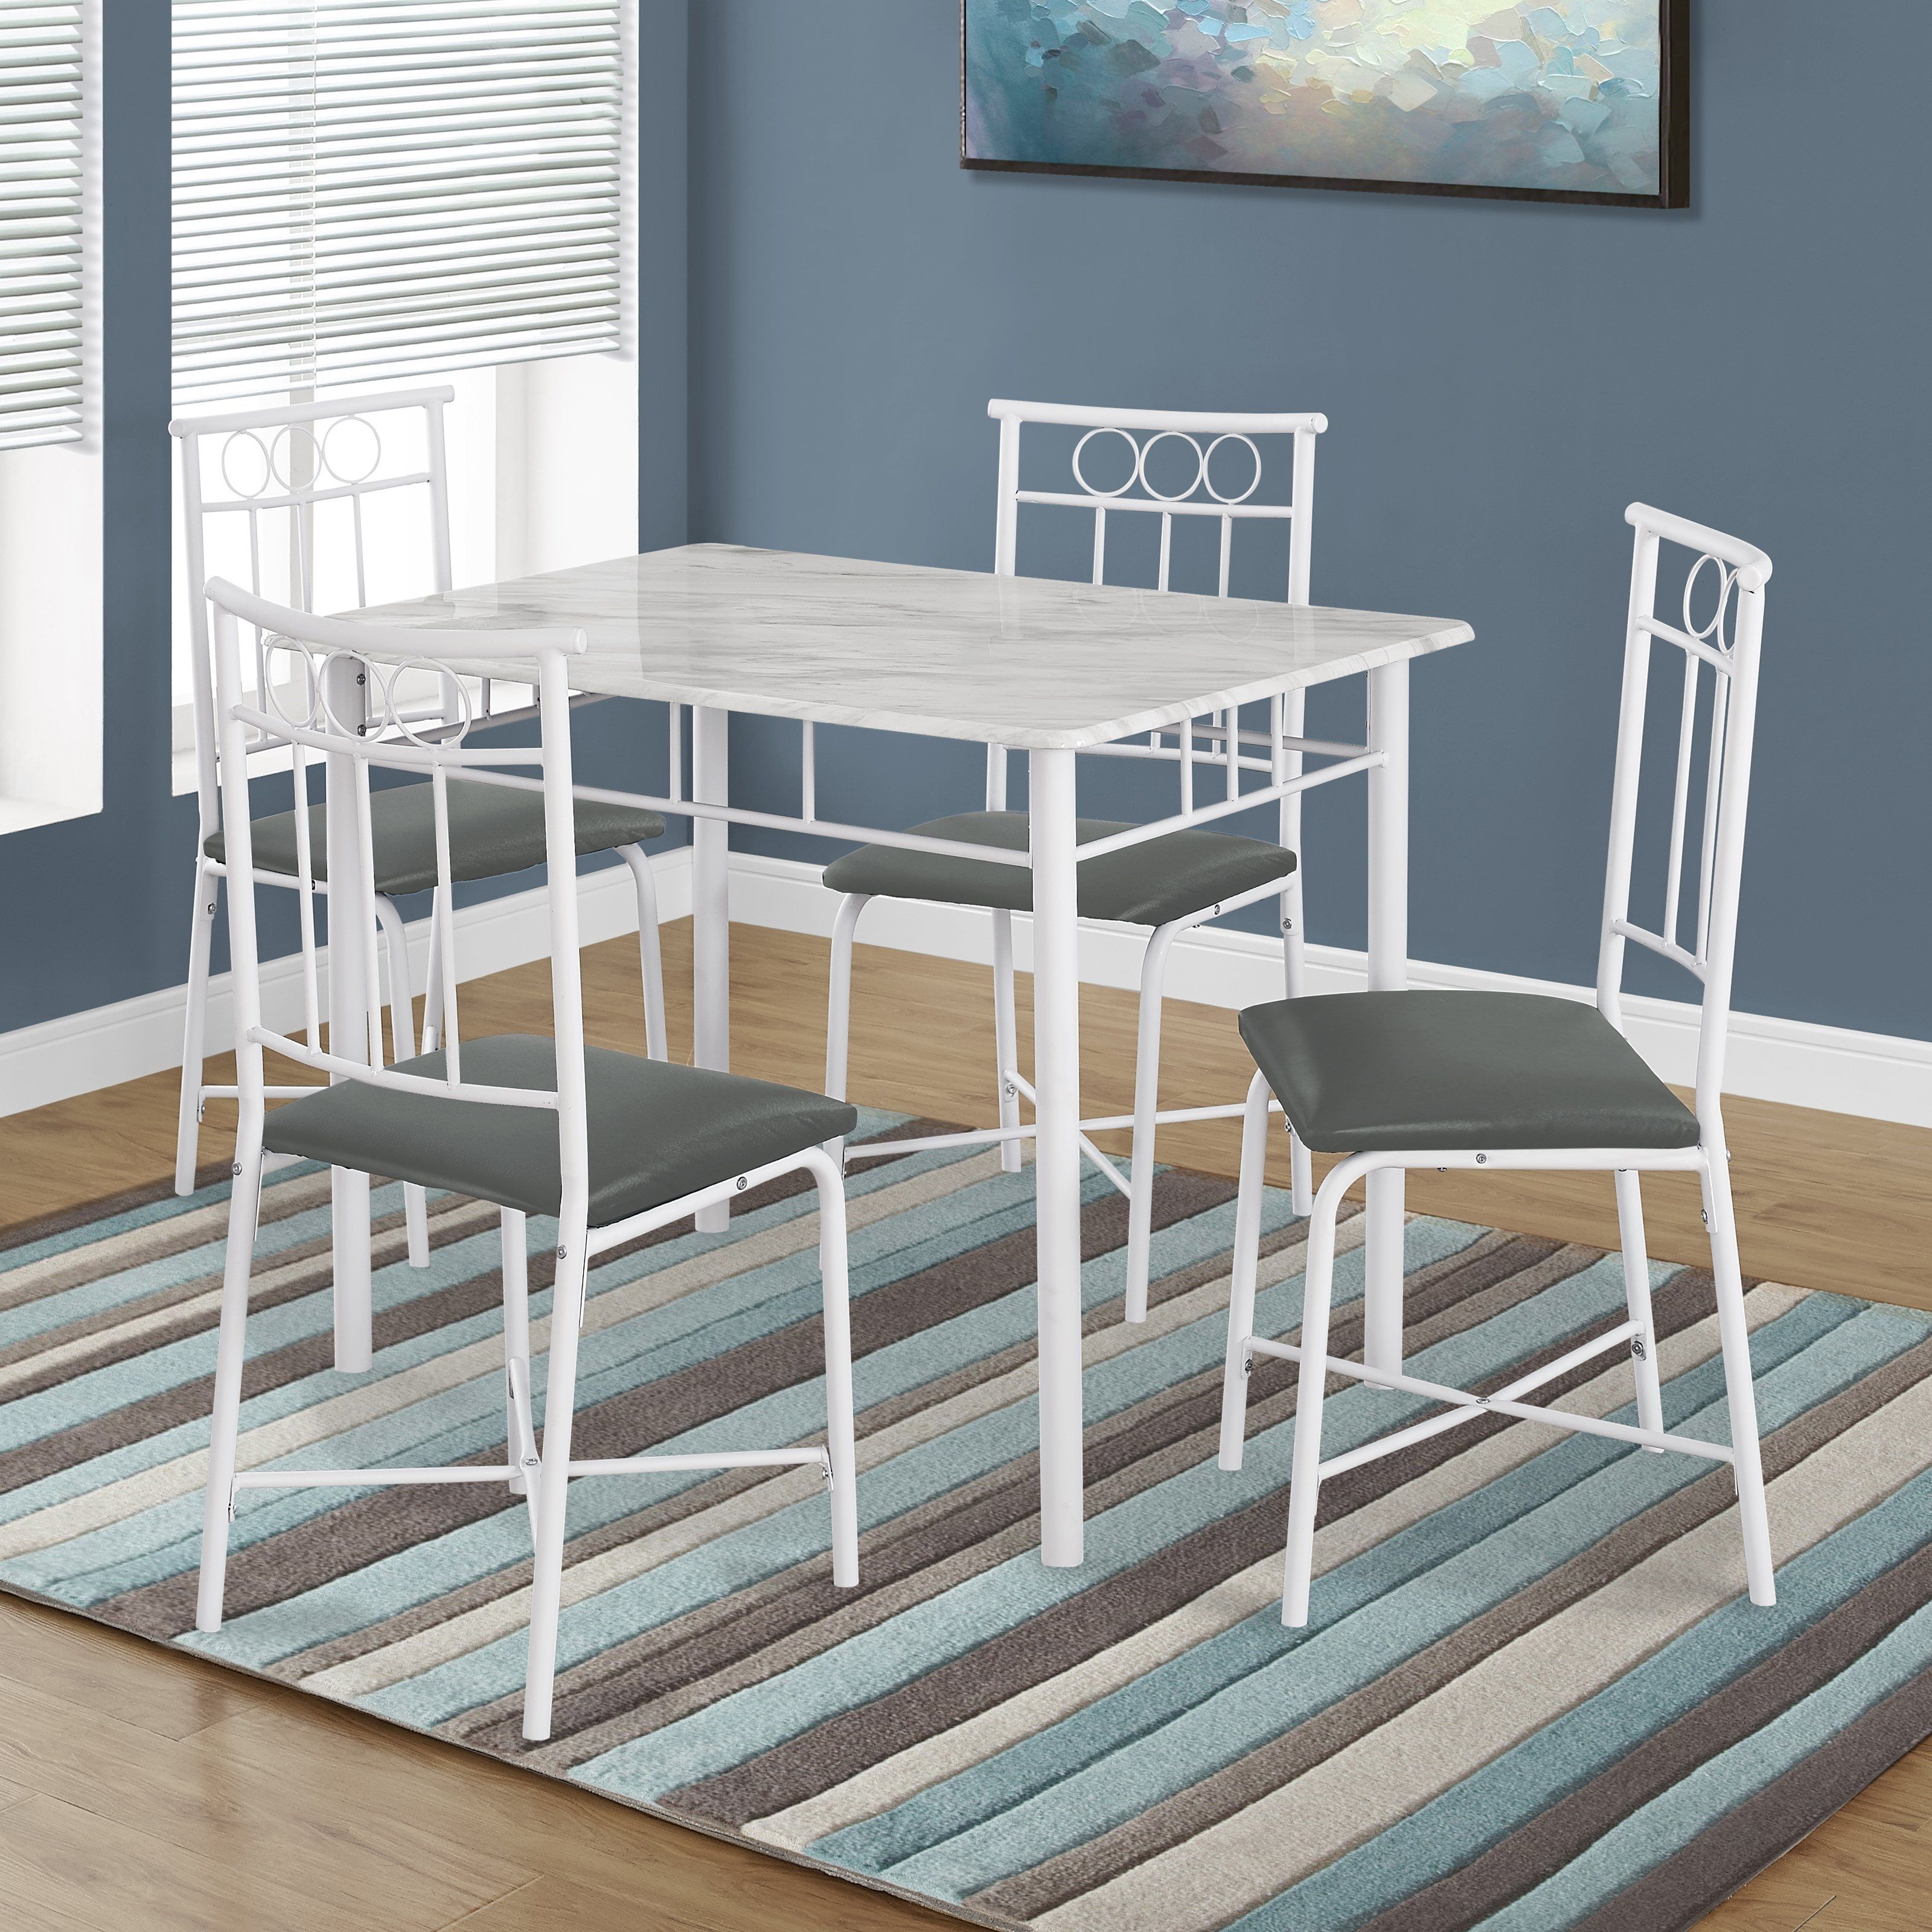 Monarch Specialties Kirsten 5 Piece Dining Table Set | Hayneedle Regarding 2017 Kirsten 5 Piece Dining Sets (View 6 of 20)